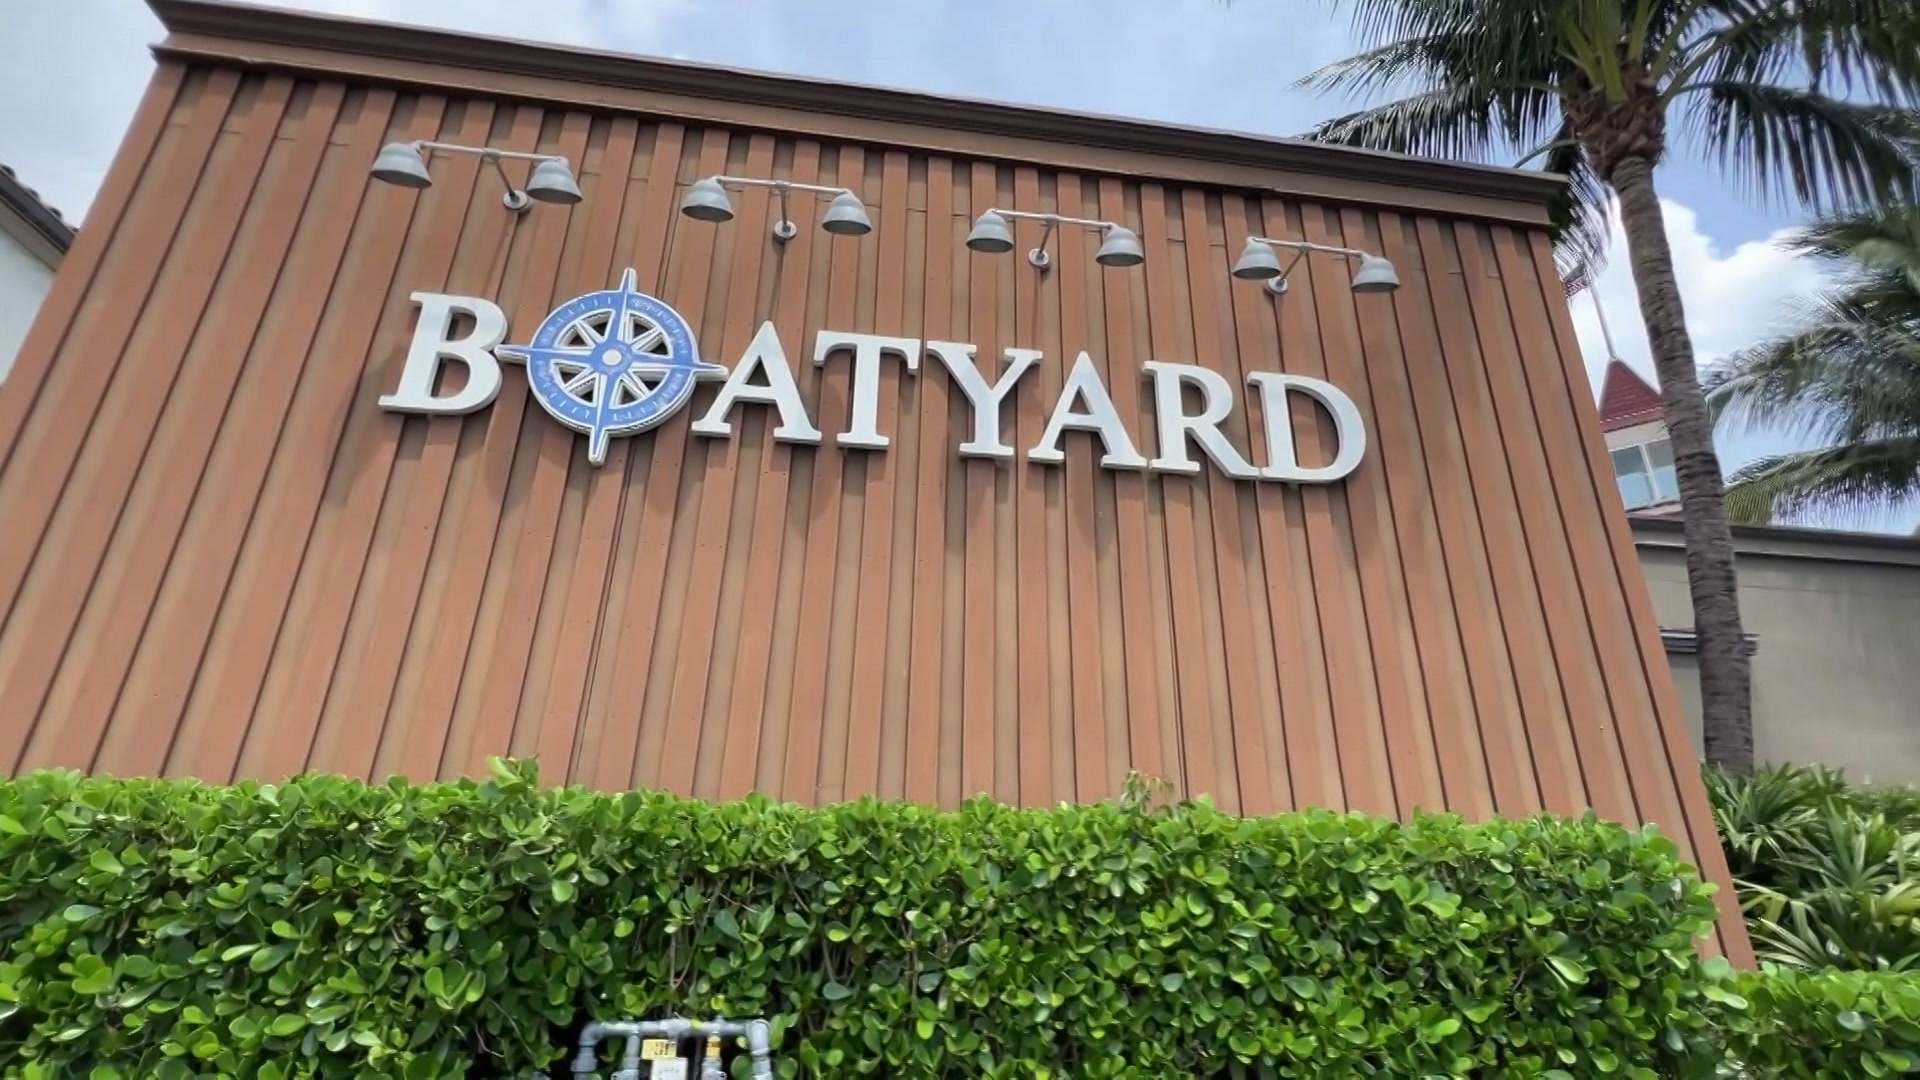 Taste Of The Town: Boatyard Fort Lauderdale Participating In 2022 Orange Bowl Wine and Food Celebration